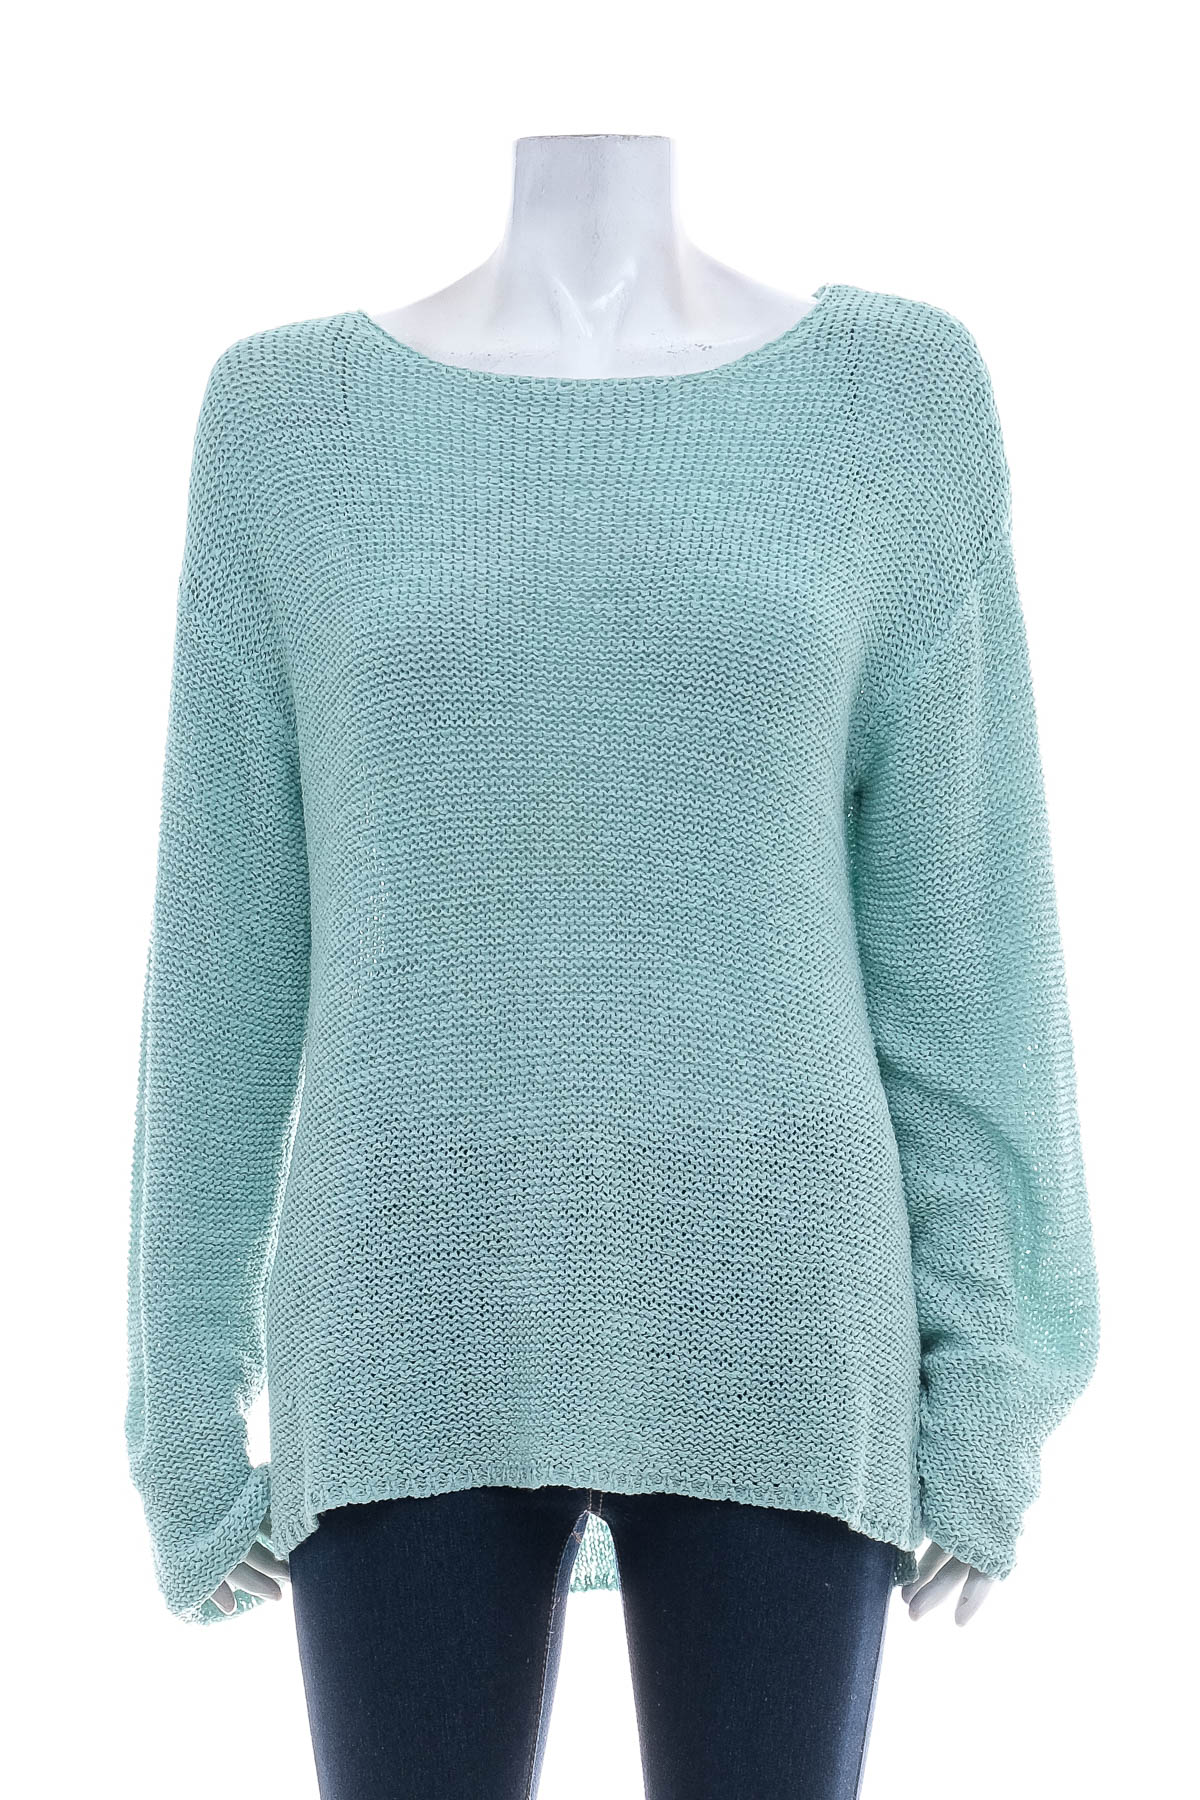 Women's sweater - Colours of the world - 0